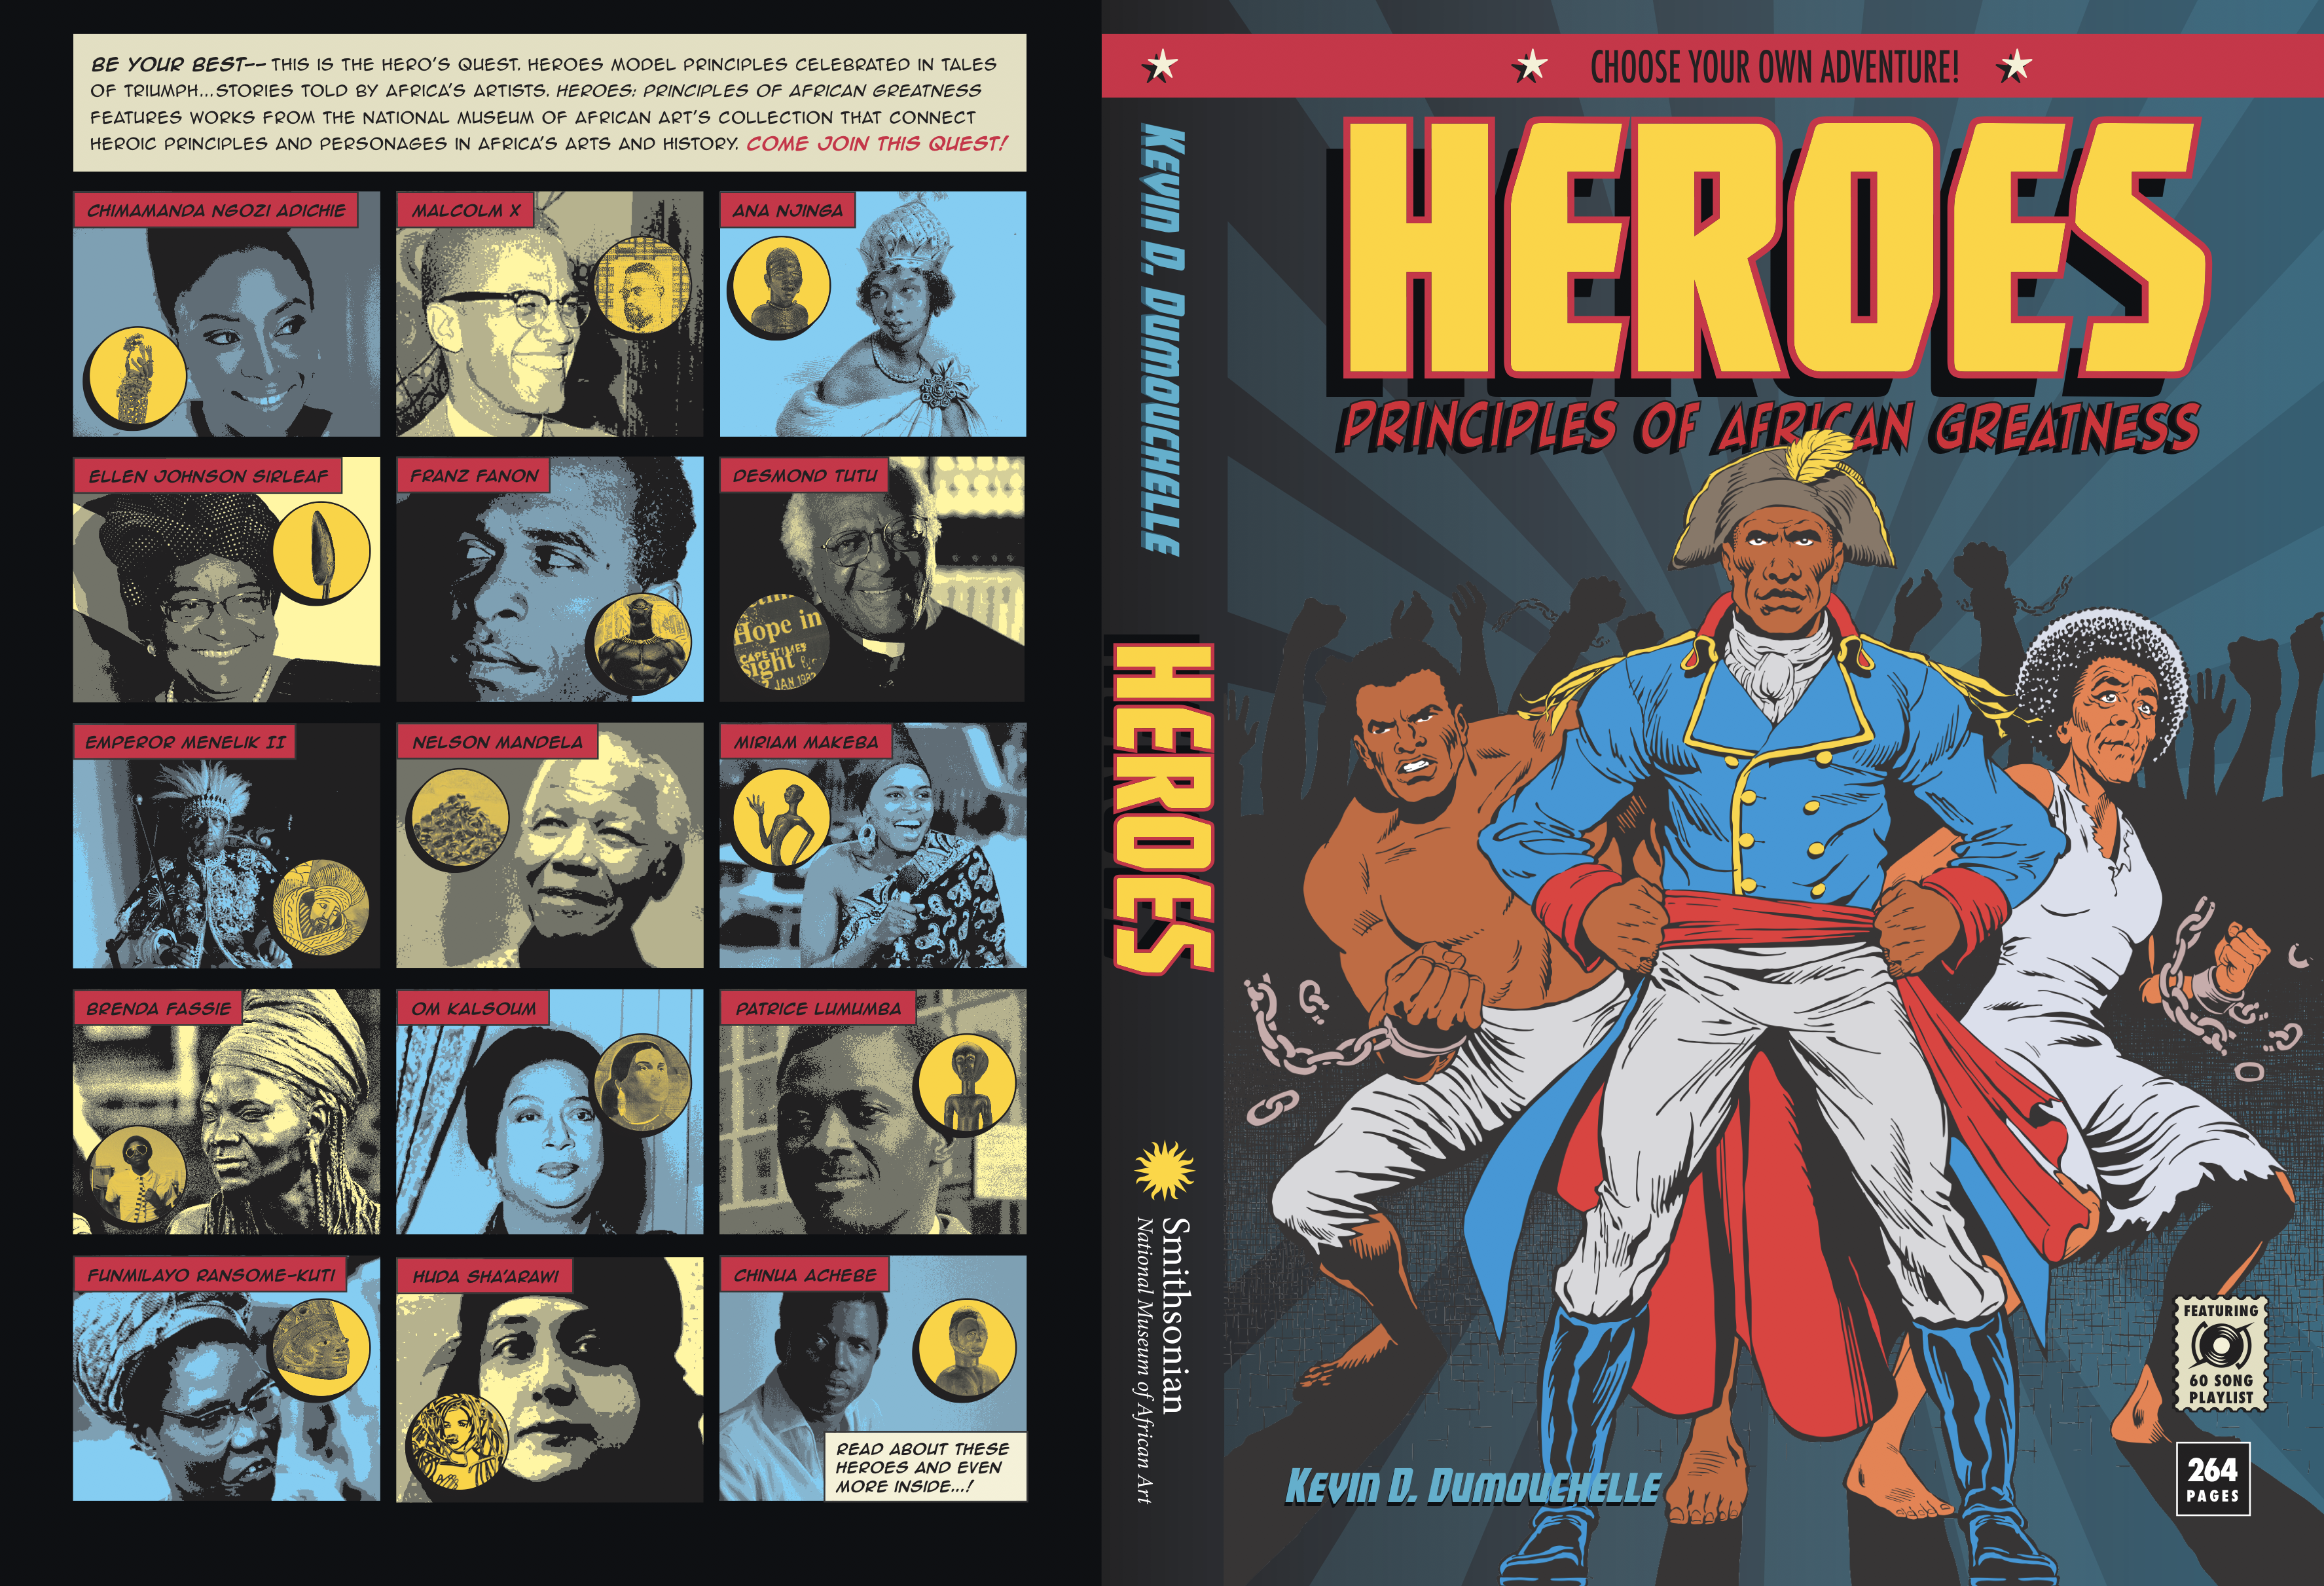 Cover of comic-style catalog book for Heroes exhiition